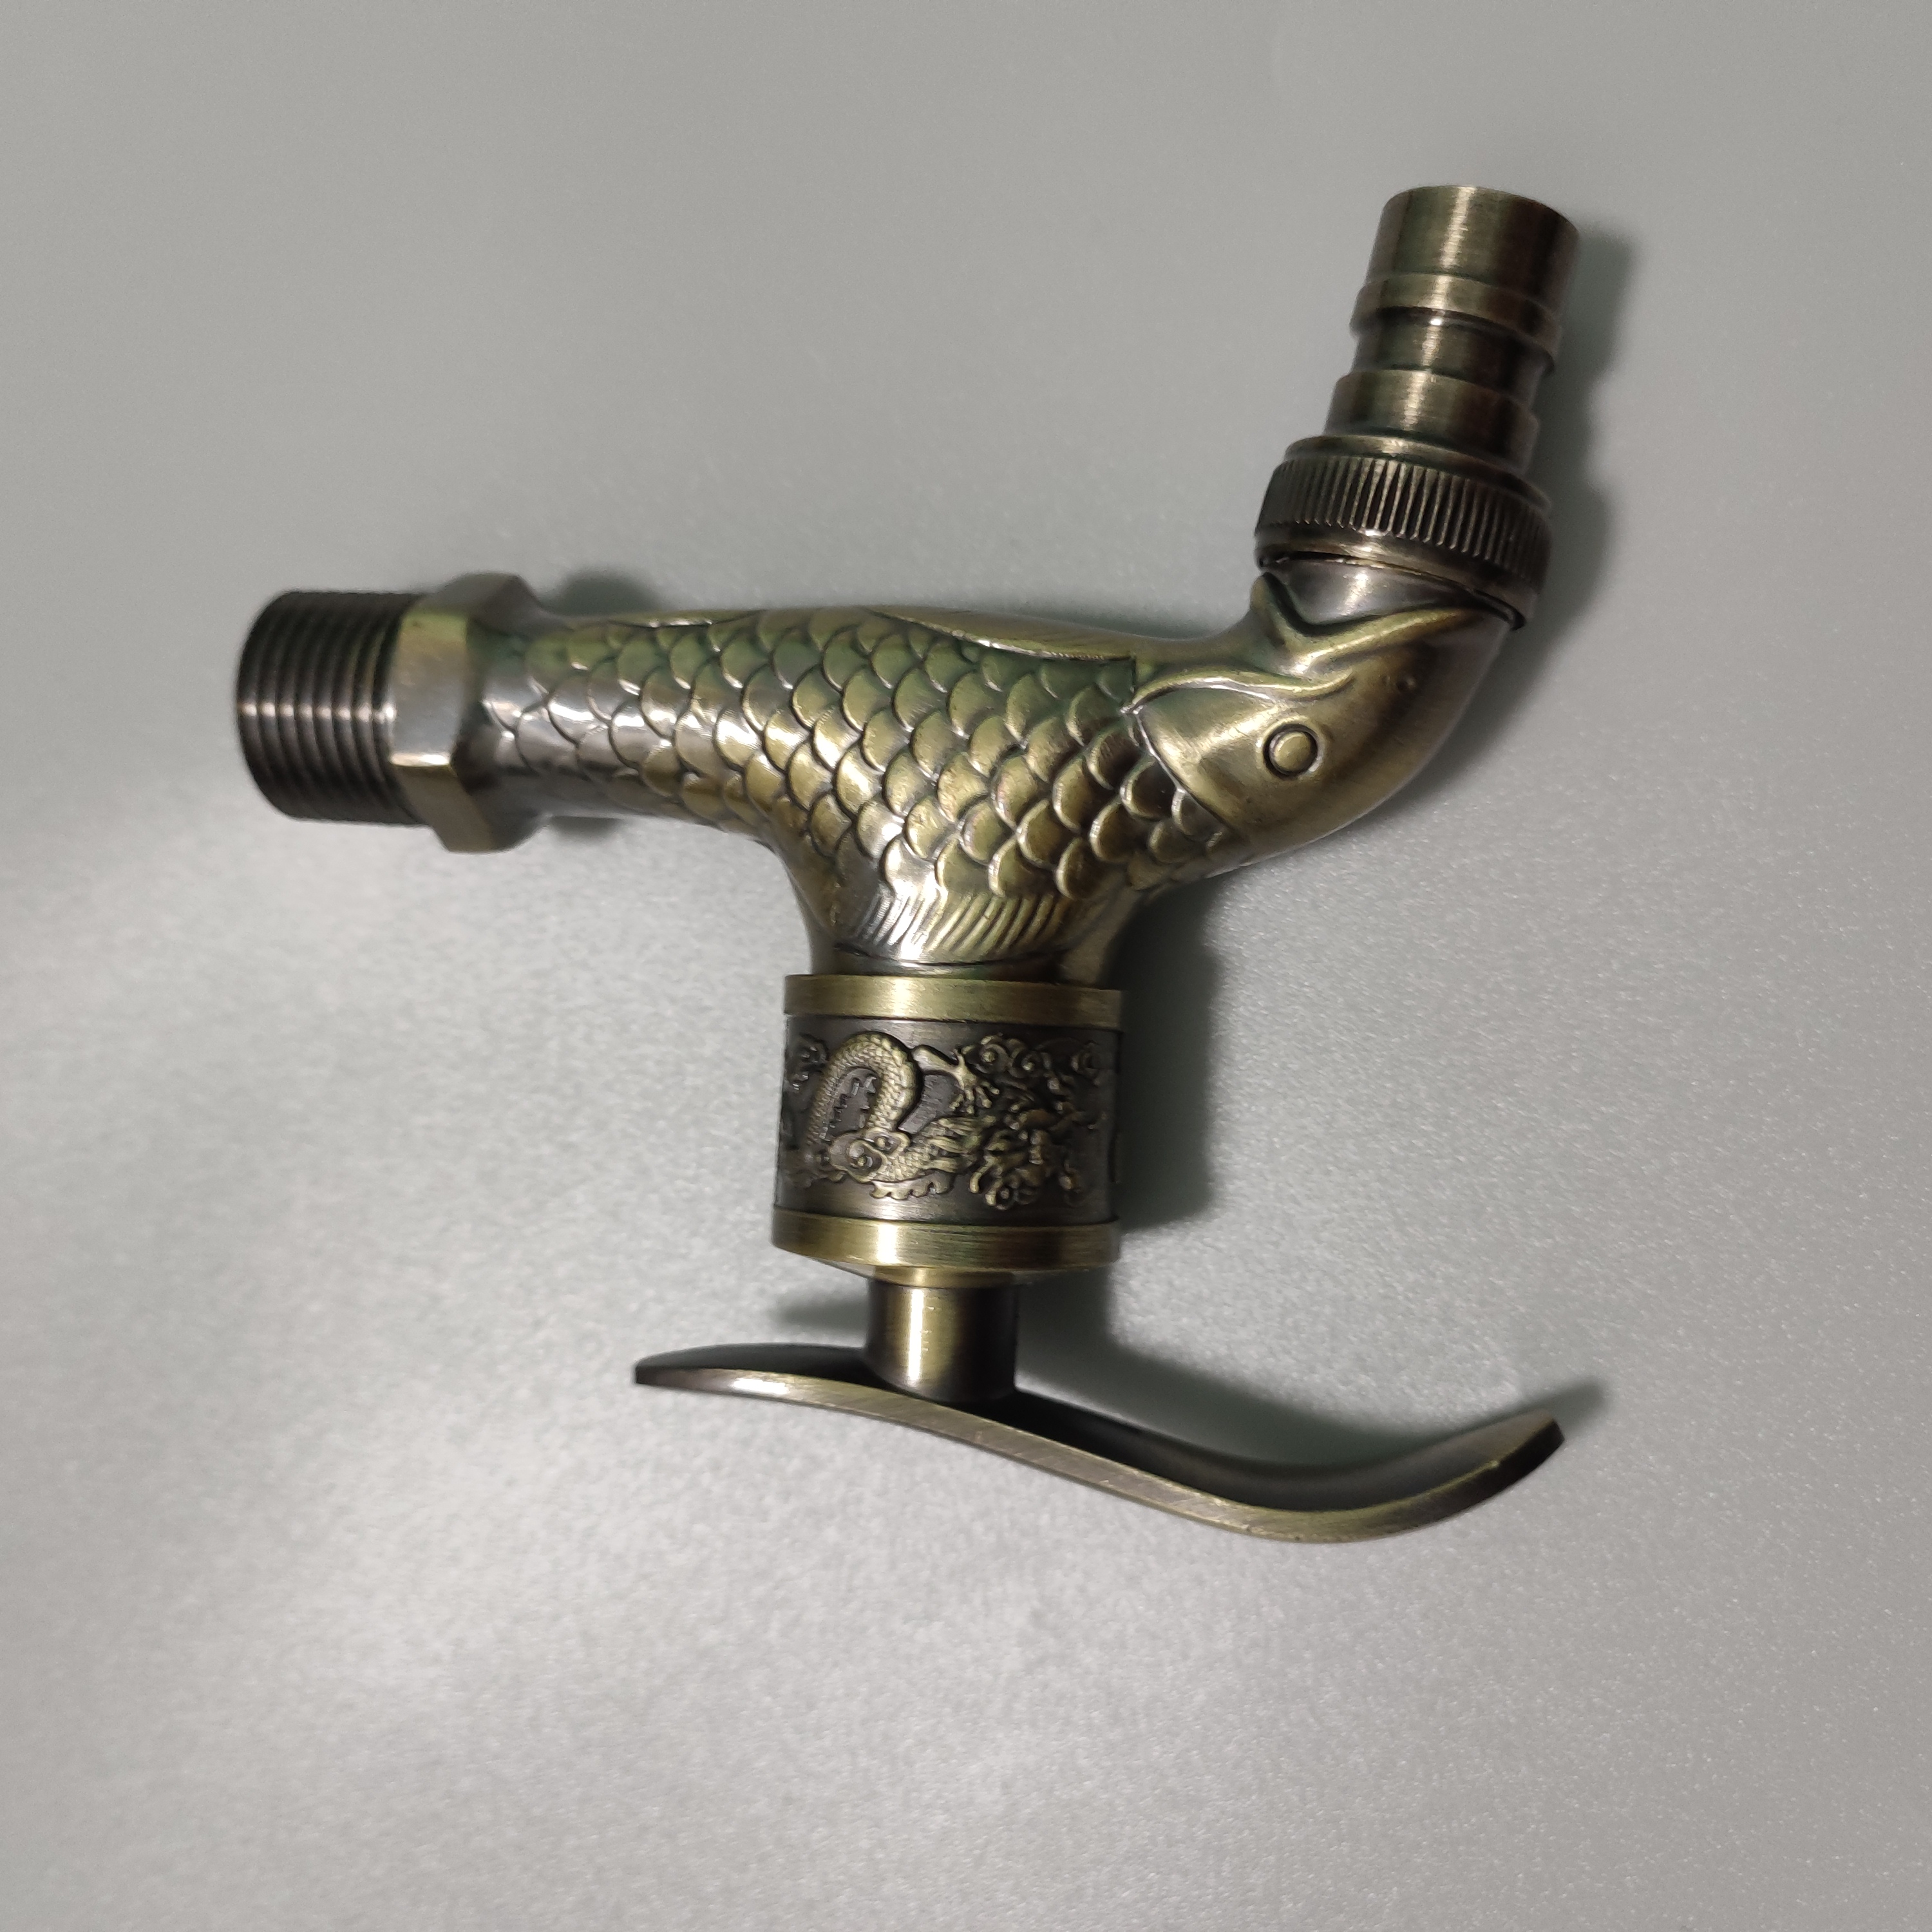 G1/2 fish pattern high quality alloy metal fast on tap garden faucet